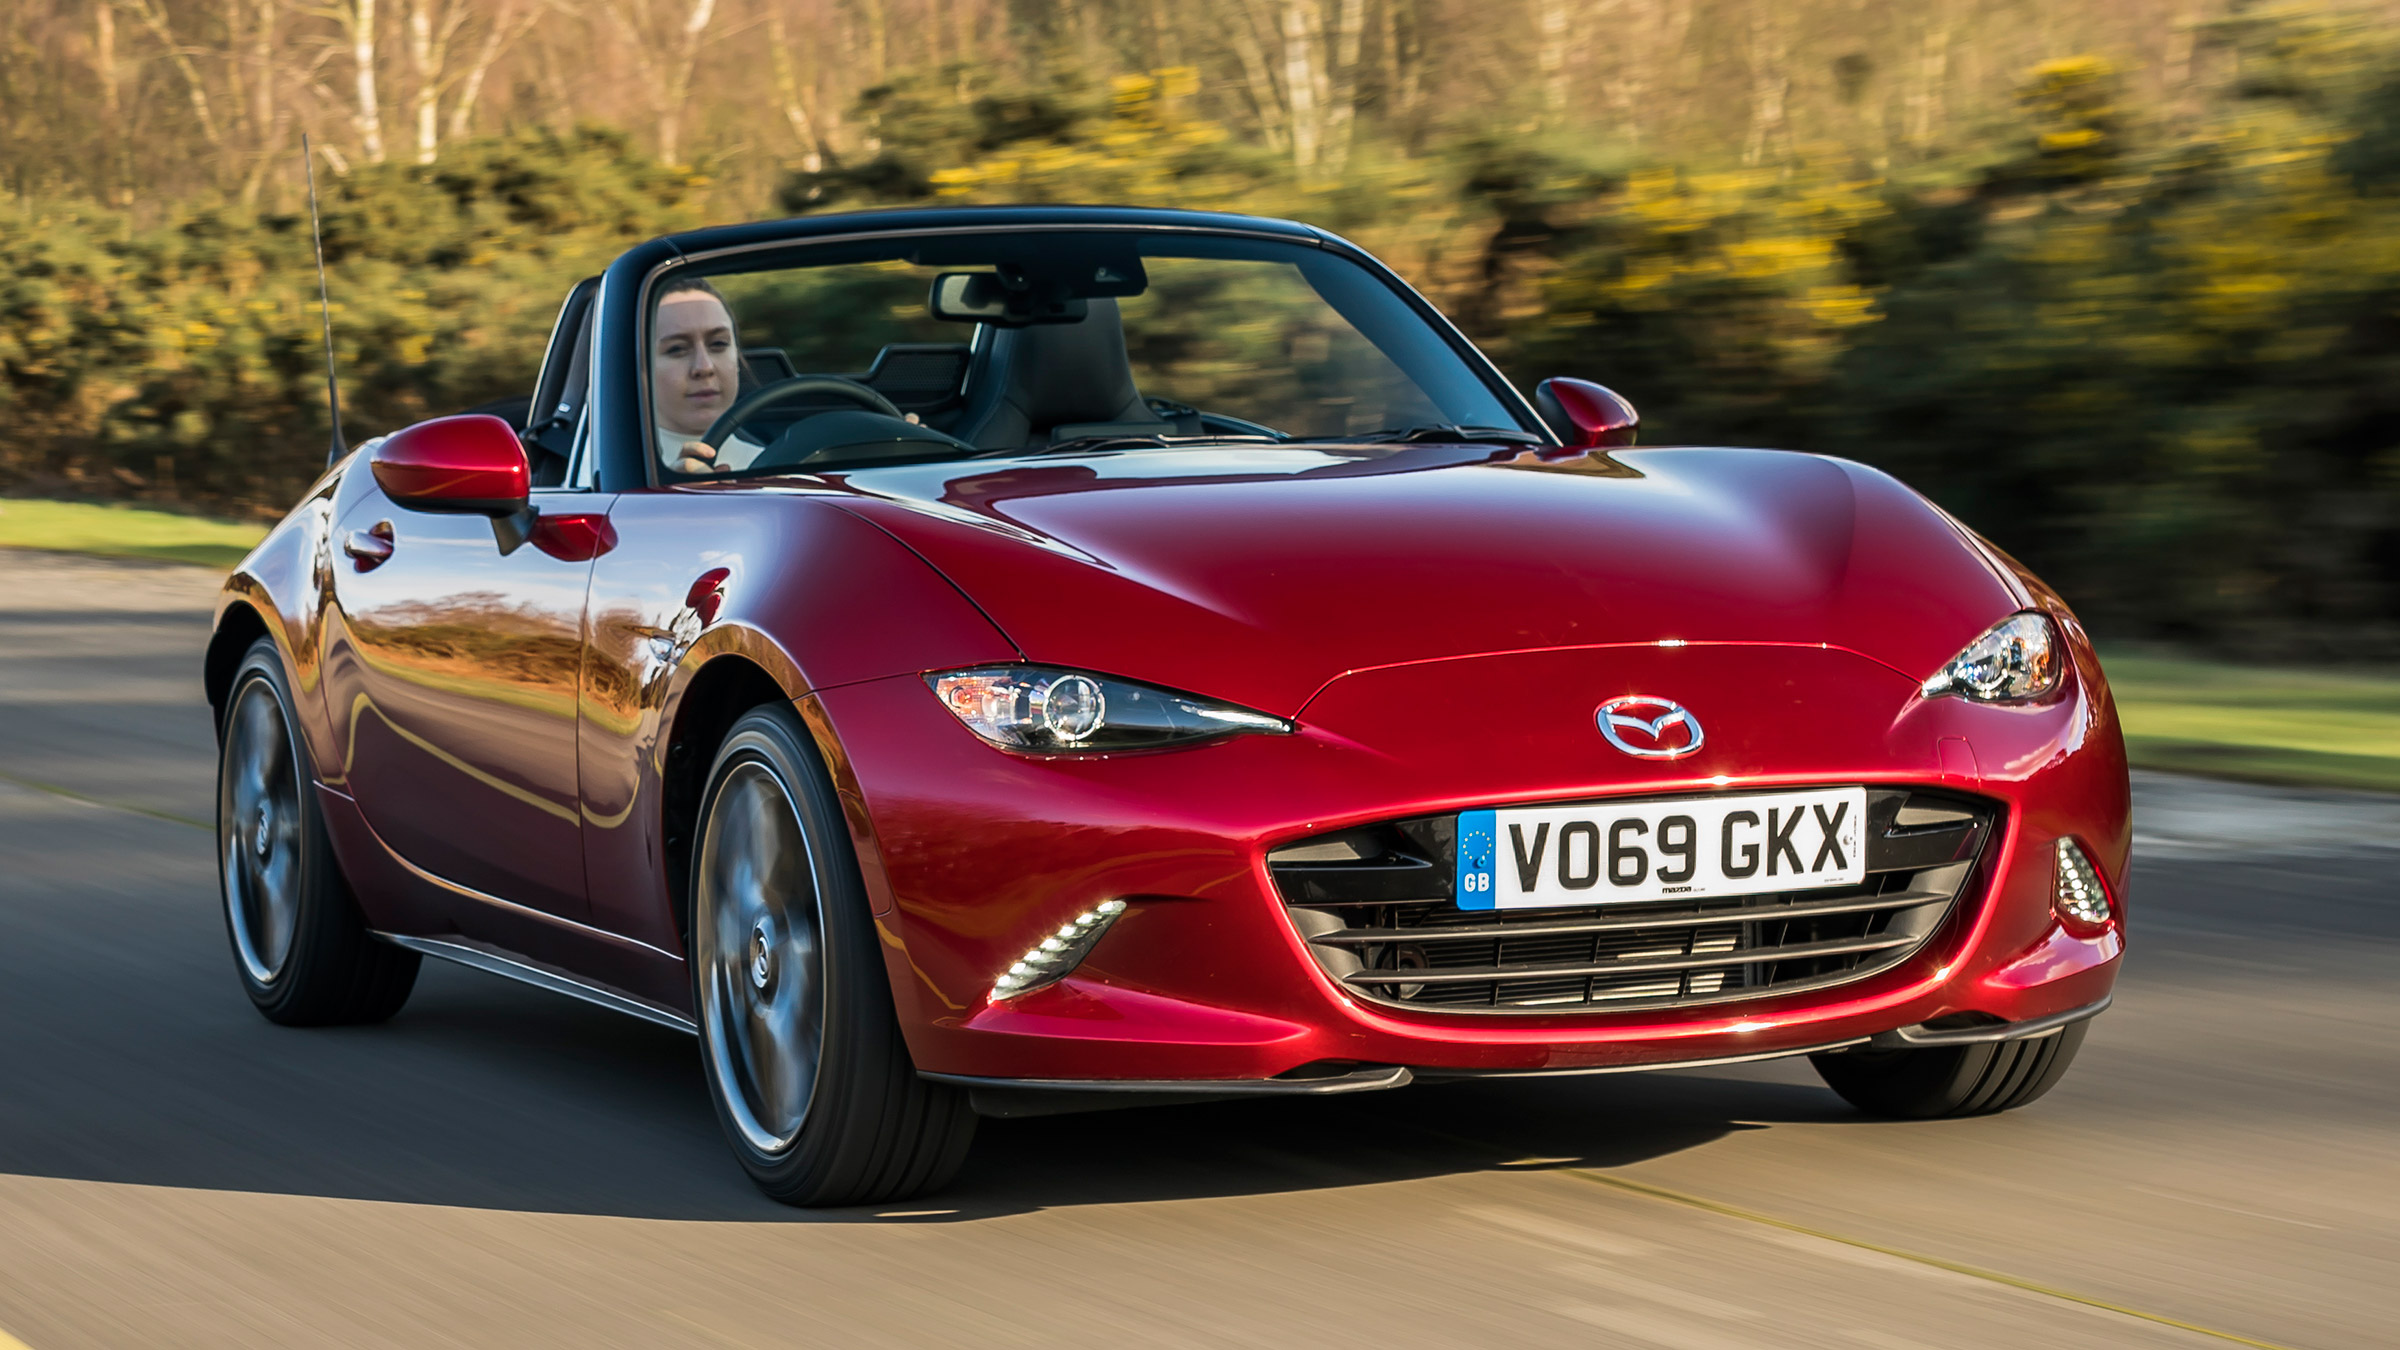 New Mazda MX-5 roadster review - pictures | Carbuyer